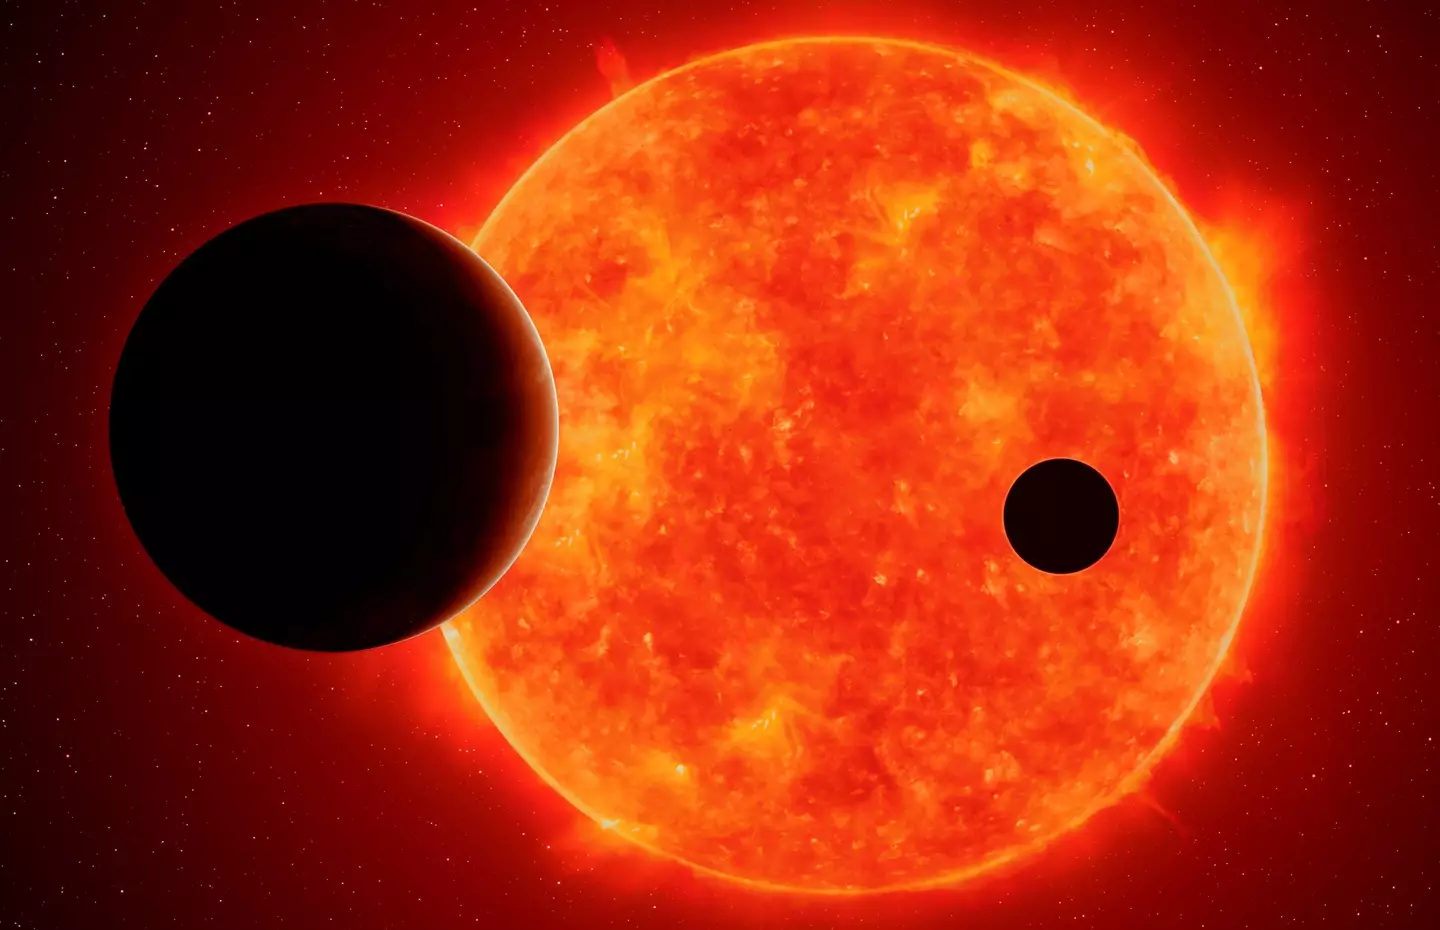 Artist's impression of two planets orbiting a red dwarf.